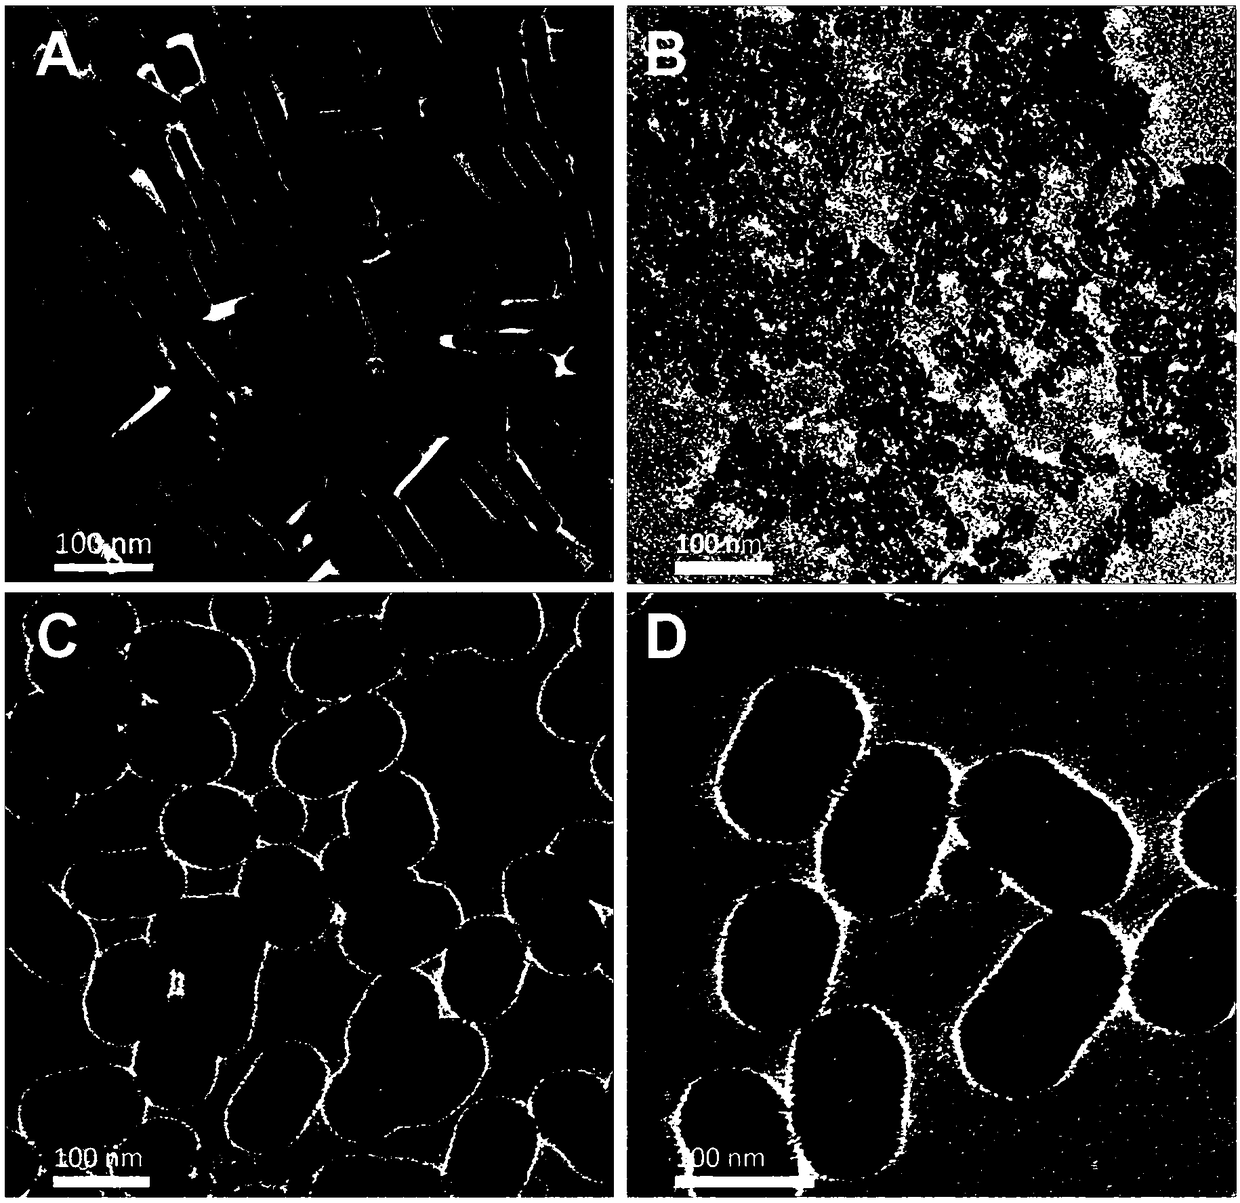 Nano enzyme with nanometer cage core of hollow gold-platinum alloy and shell of porous silicon dioxide, preparation method and application thereof